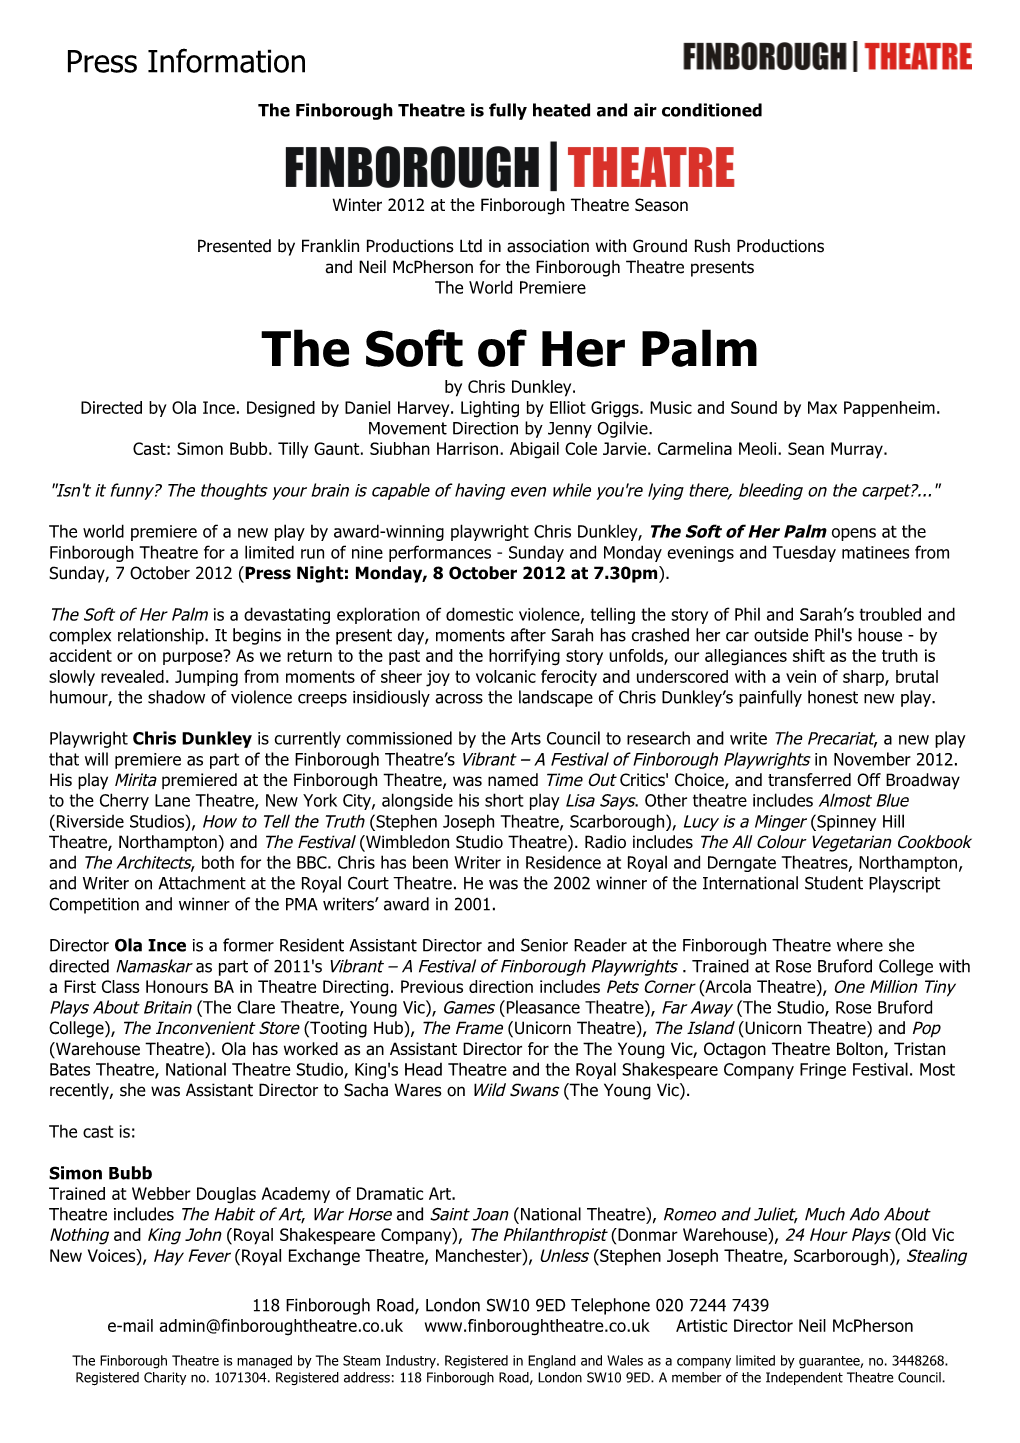 The Soft of Her Palm by Chris Dunkley